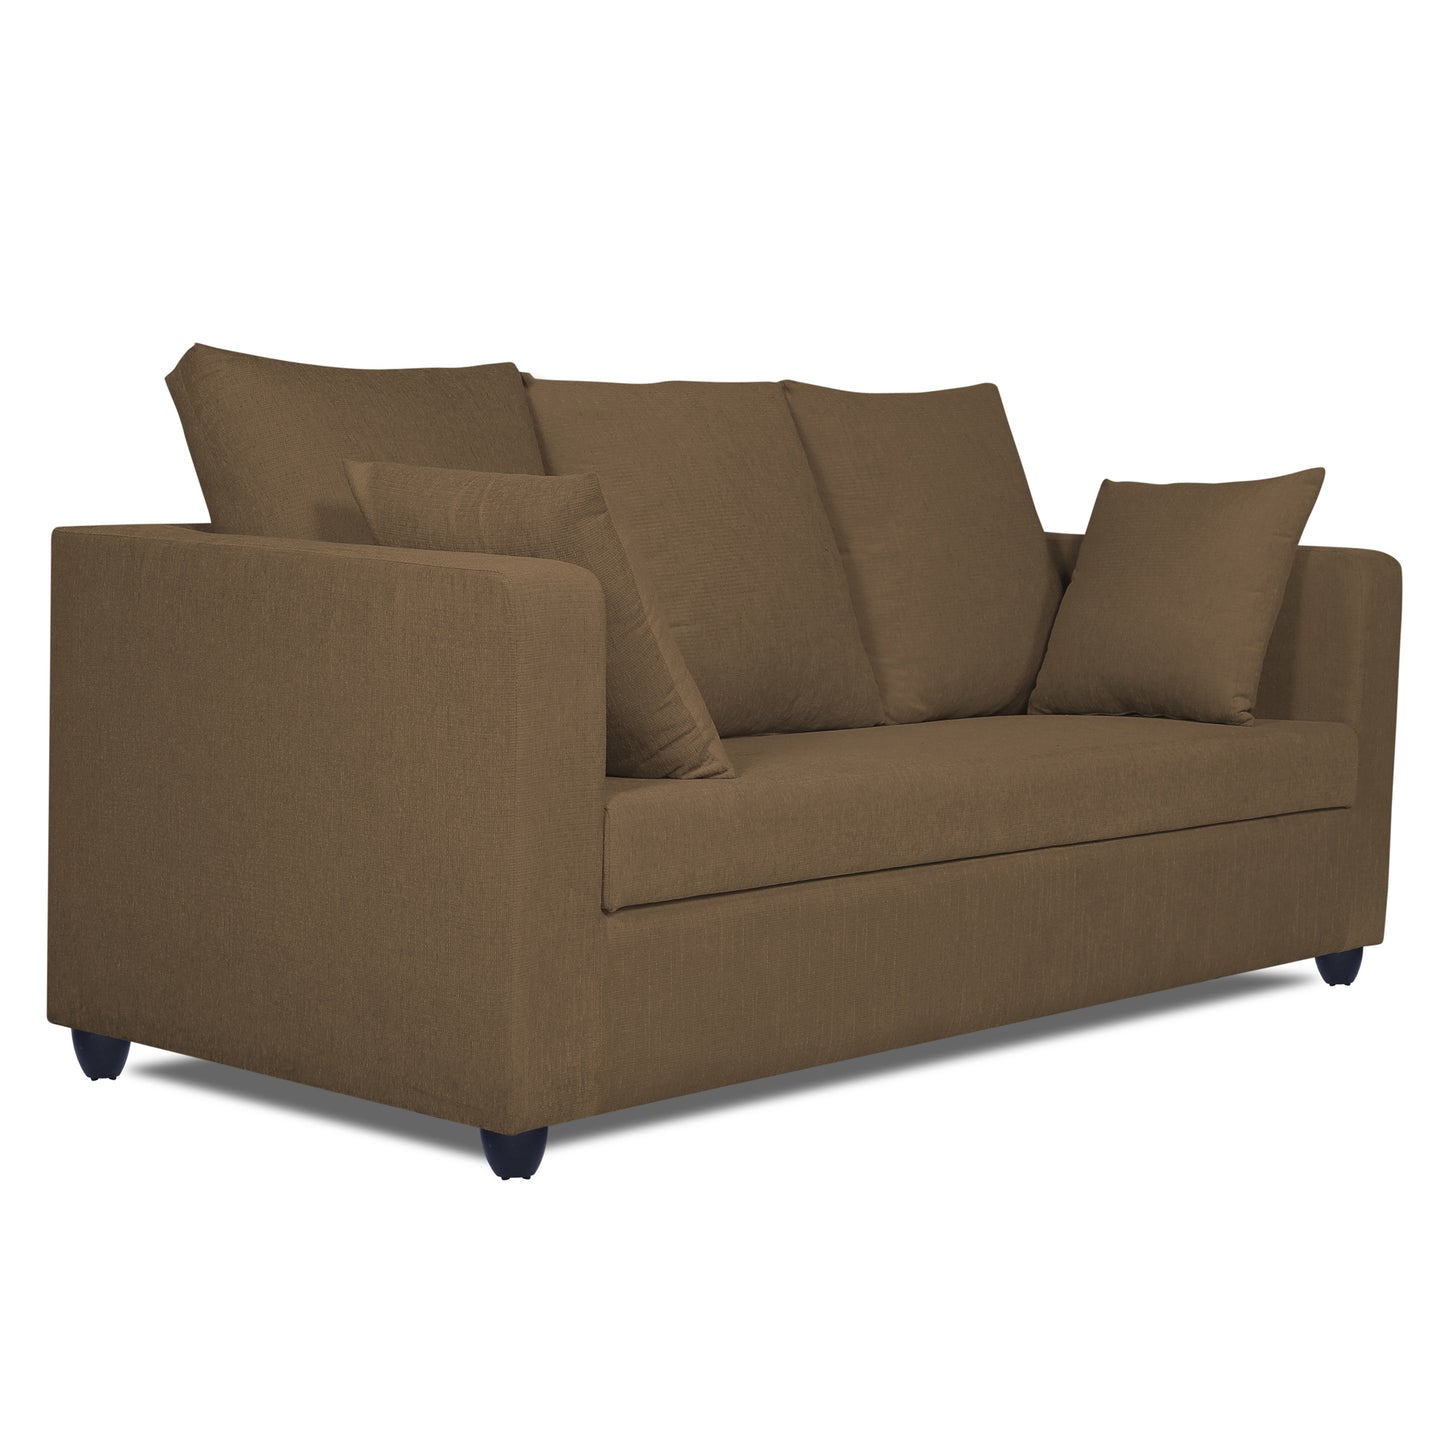 Adorn India Zink Straight Line 3 Seater Sofa (Brown)